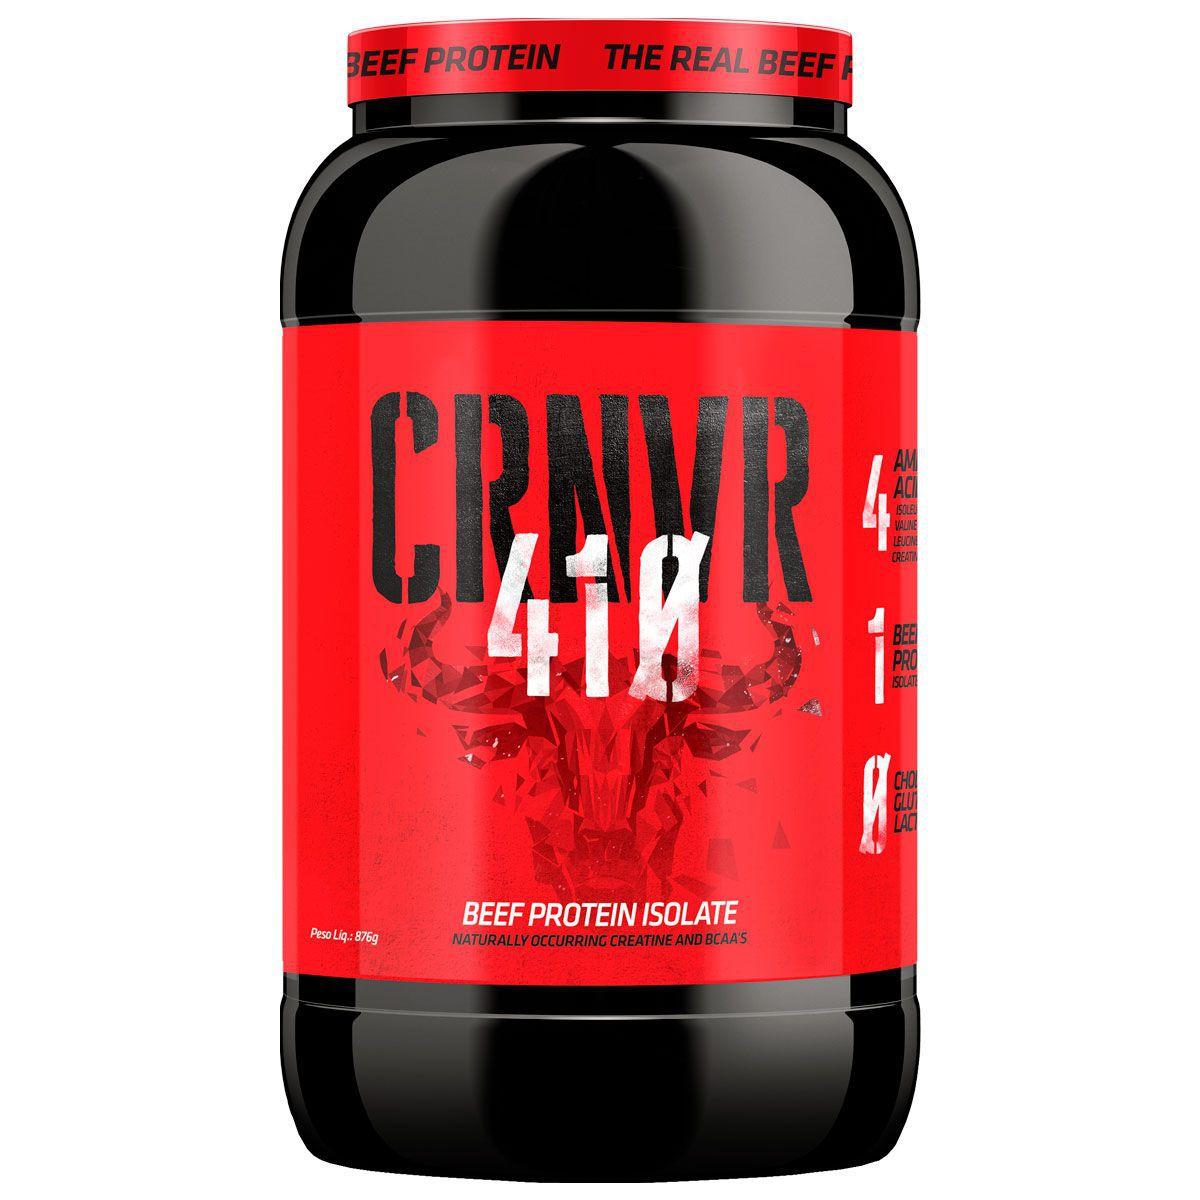 Crnvr 410 Beef Protein Isolate 876gr - Carnivor